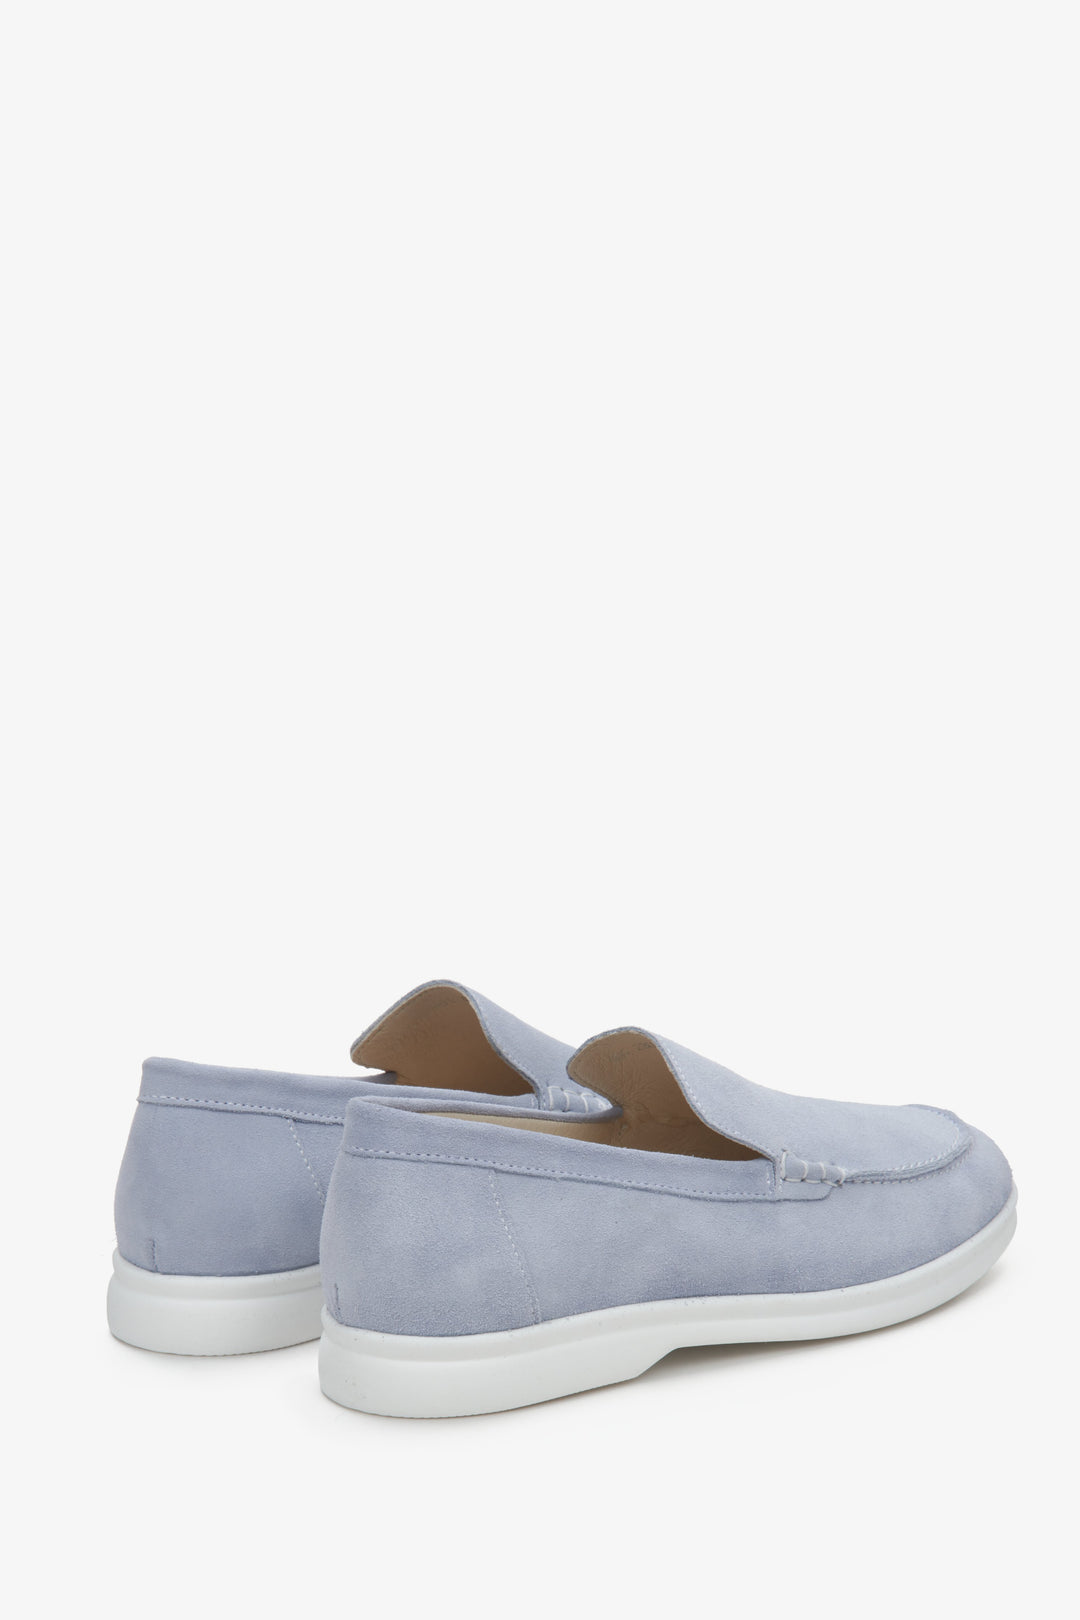 Women's suede moccasins in light blue Estro - close-up of the heel and side seam of the shoes.